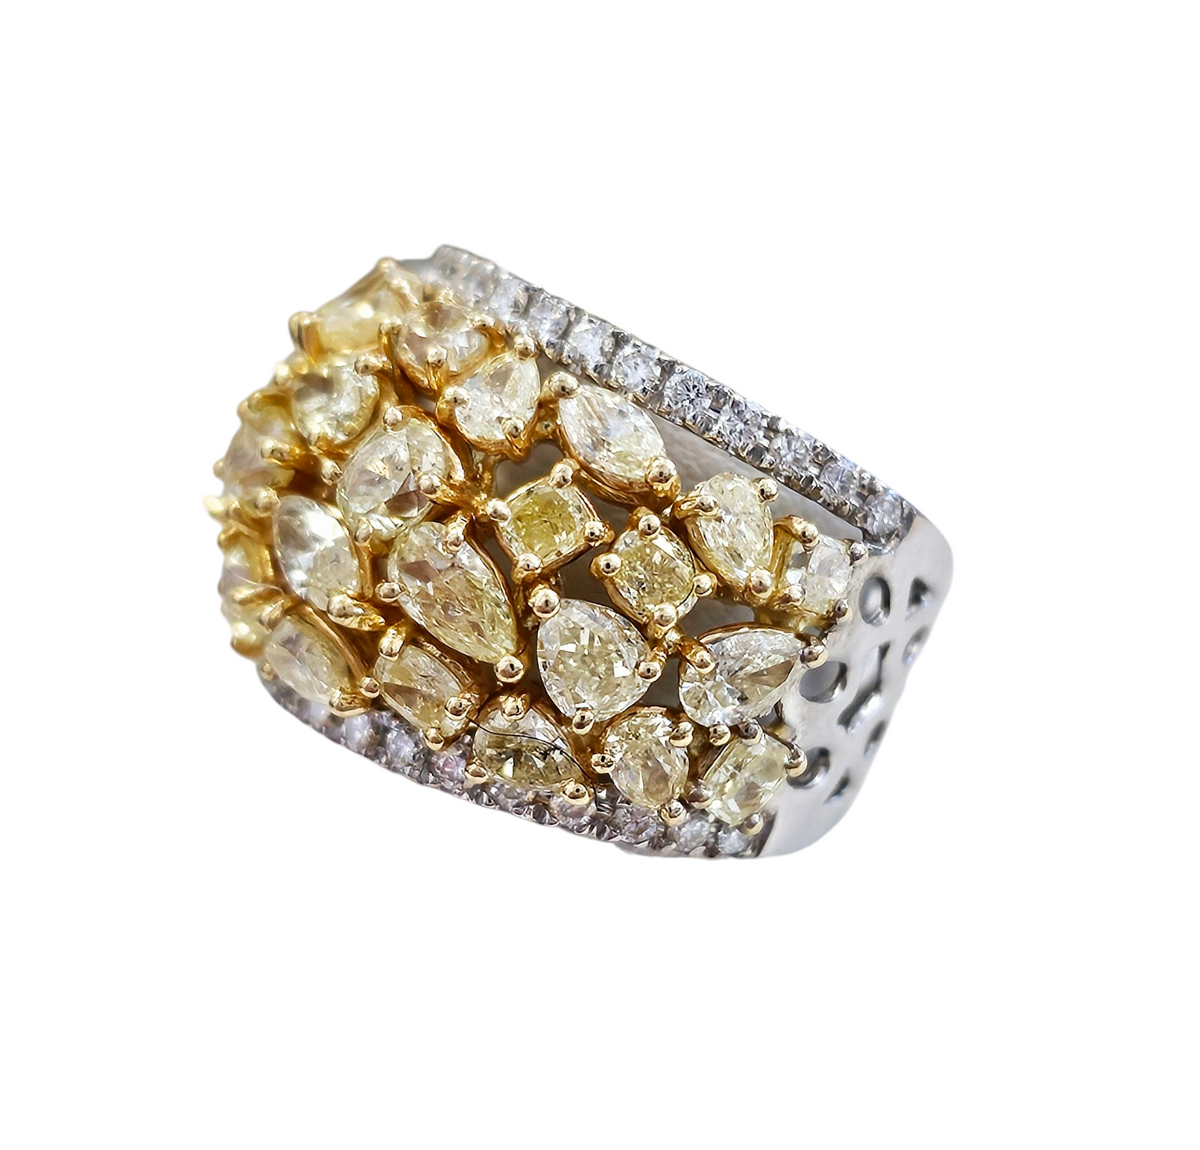 Multi-shape Yellow and White Diamond Band made in Two-tone 18-Karat Yellow and White Gold